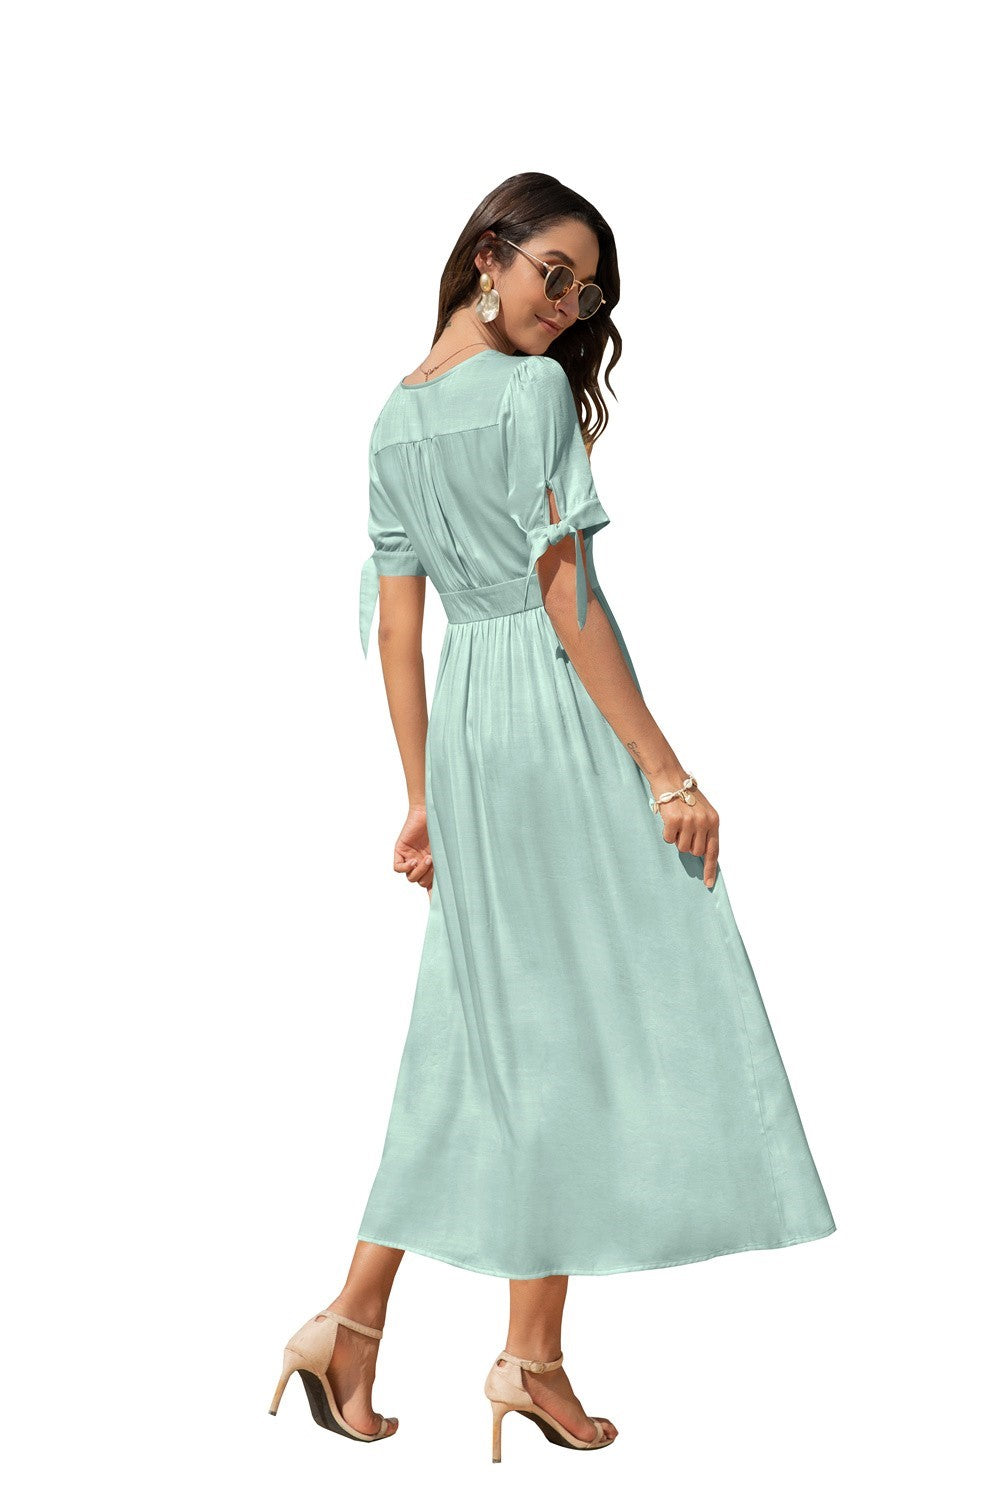 Women Maxi Dress with buttons on the front - annva-usa